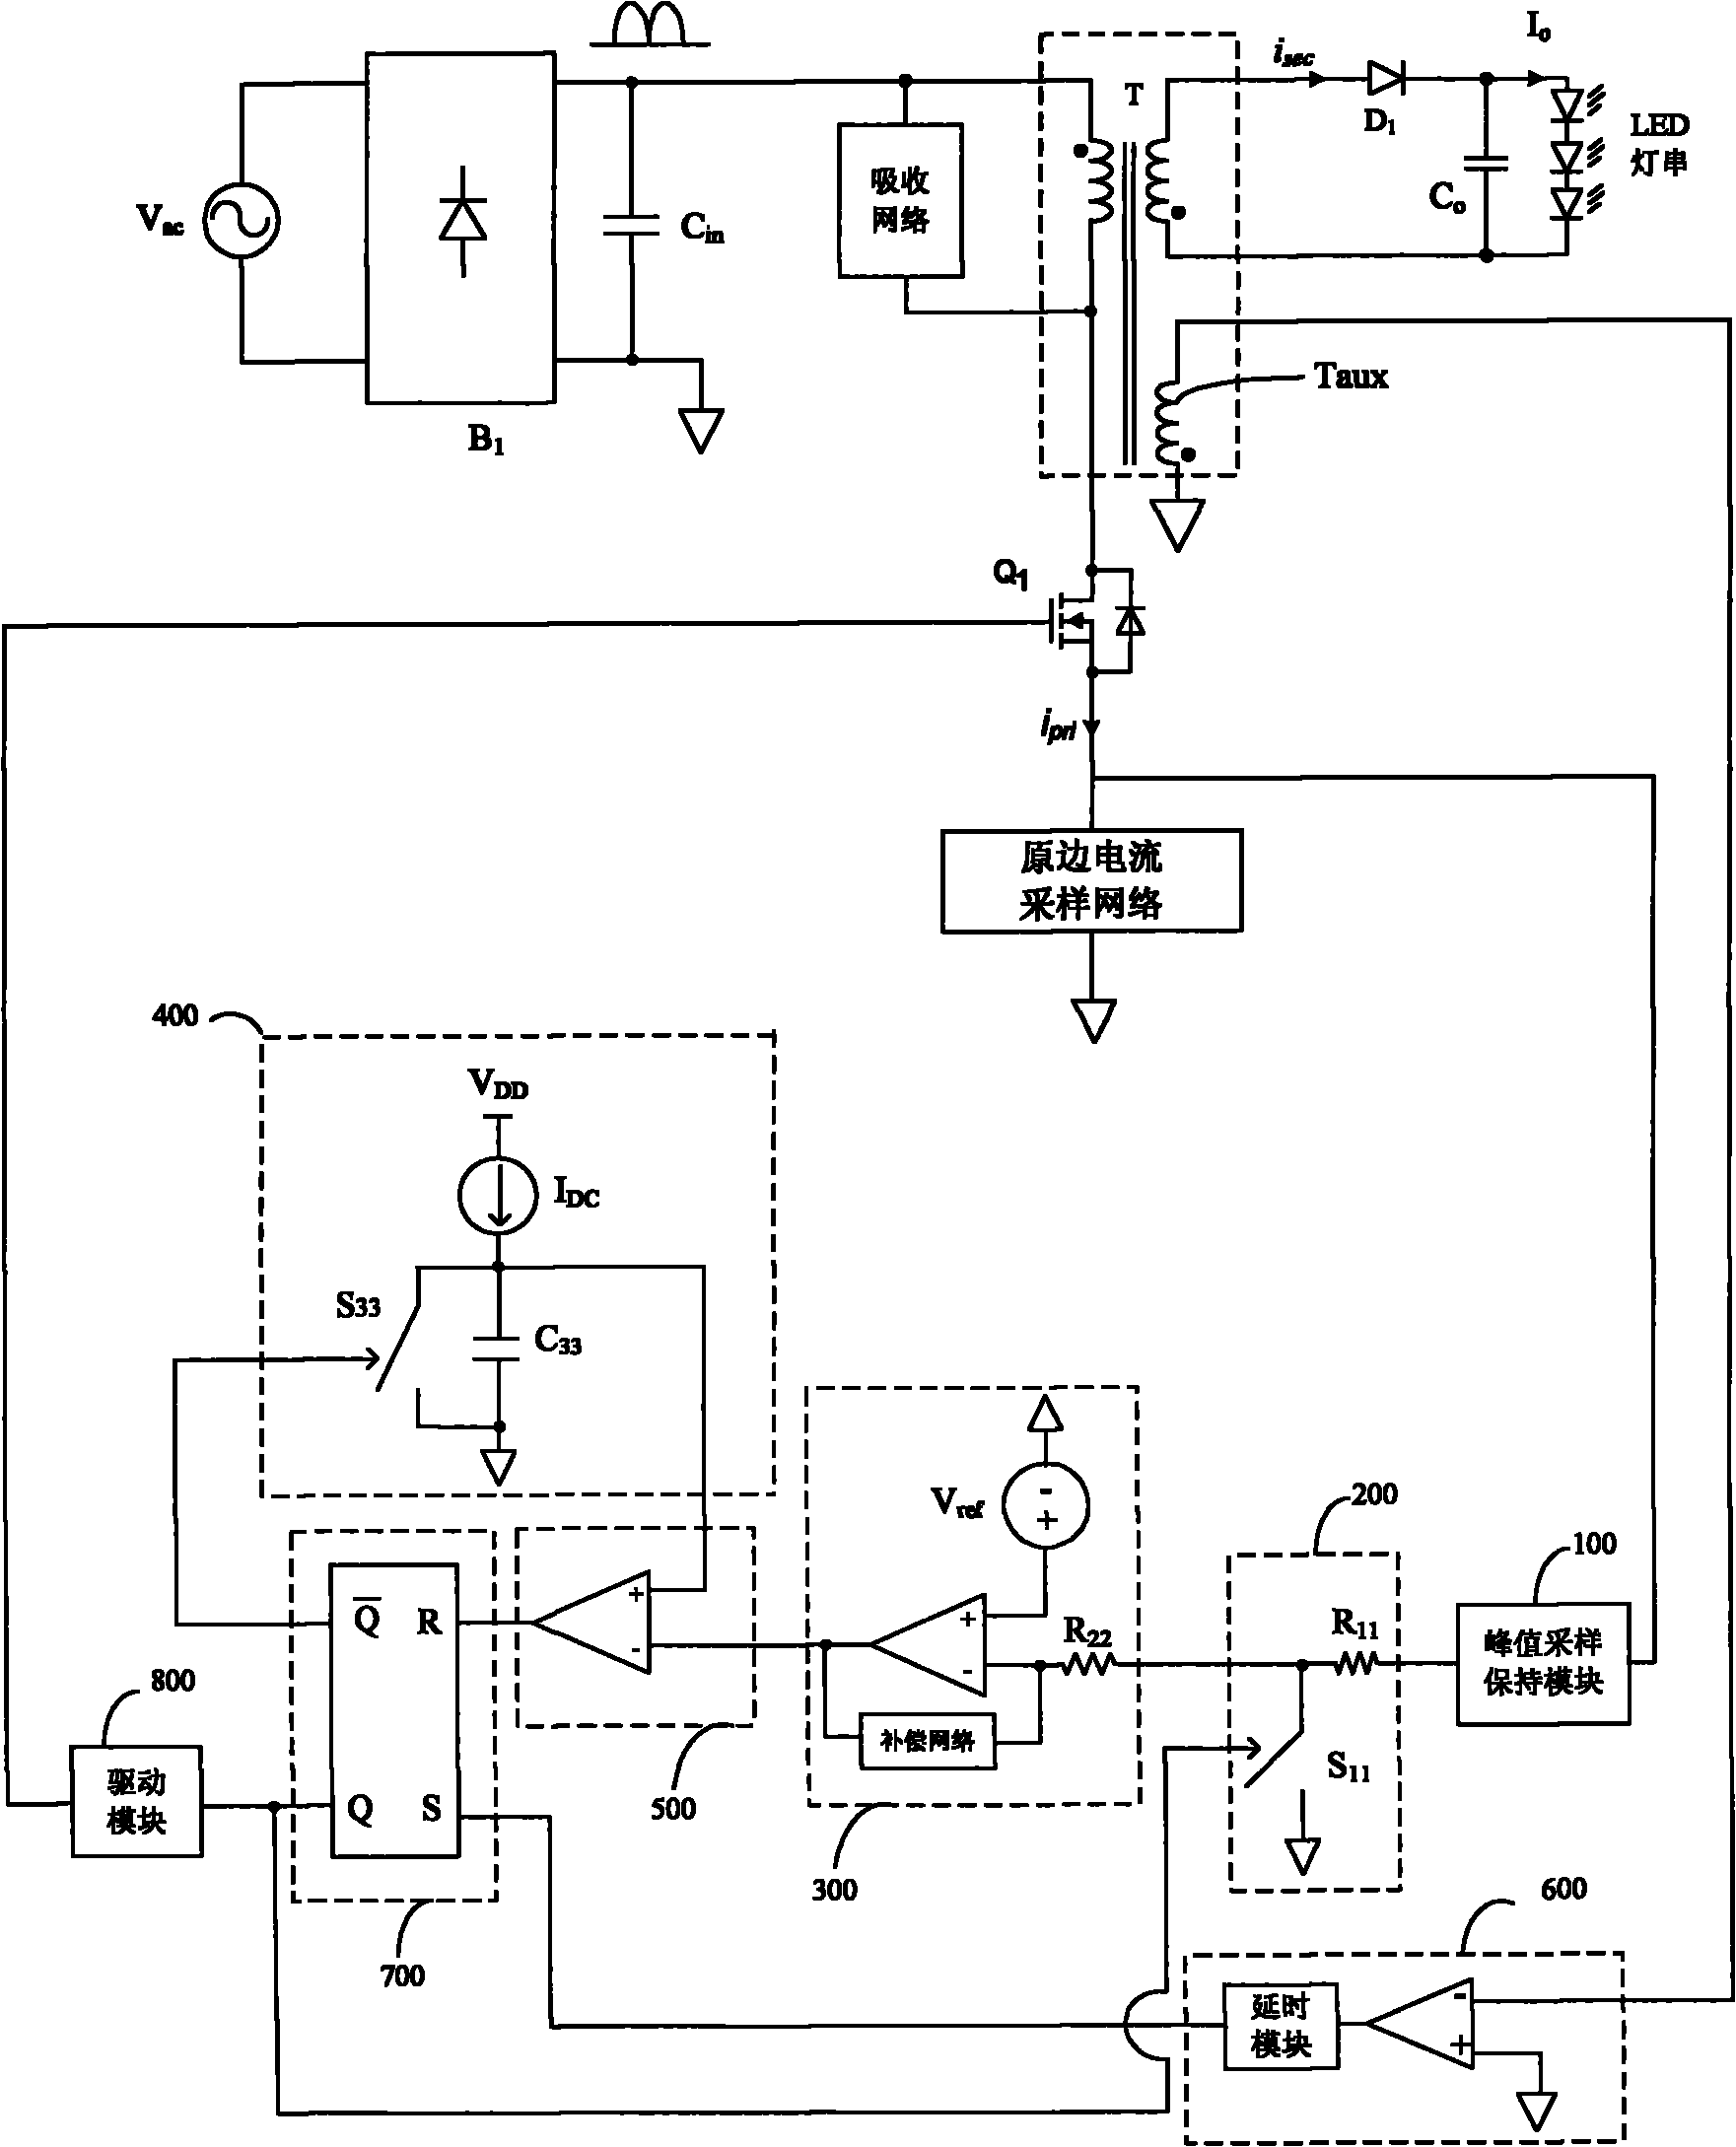 Constant-on-time primary side constant-current control device for LED driver with high power factor